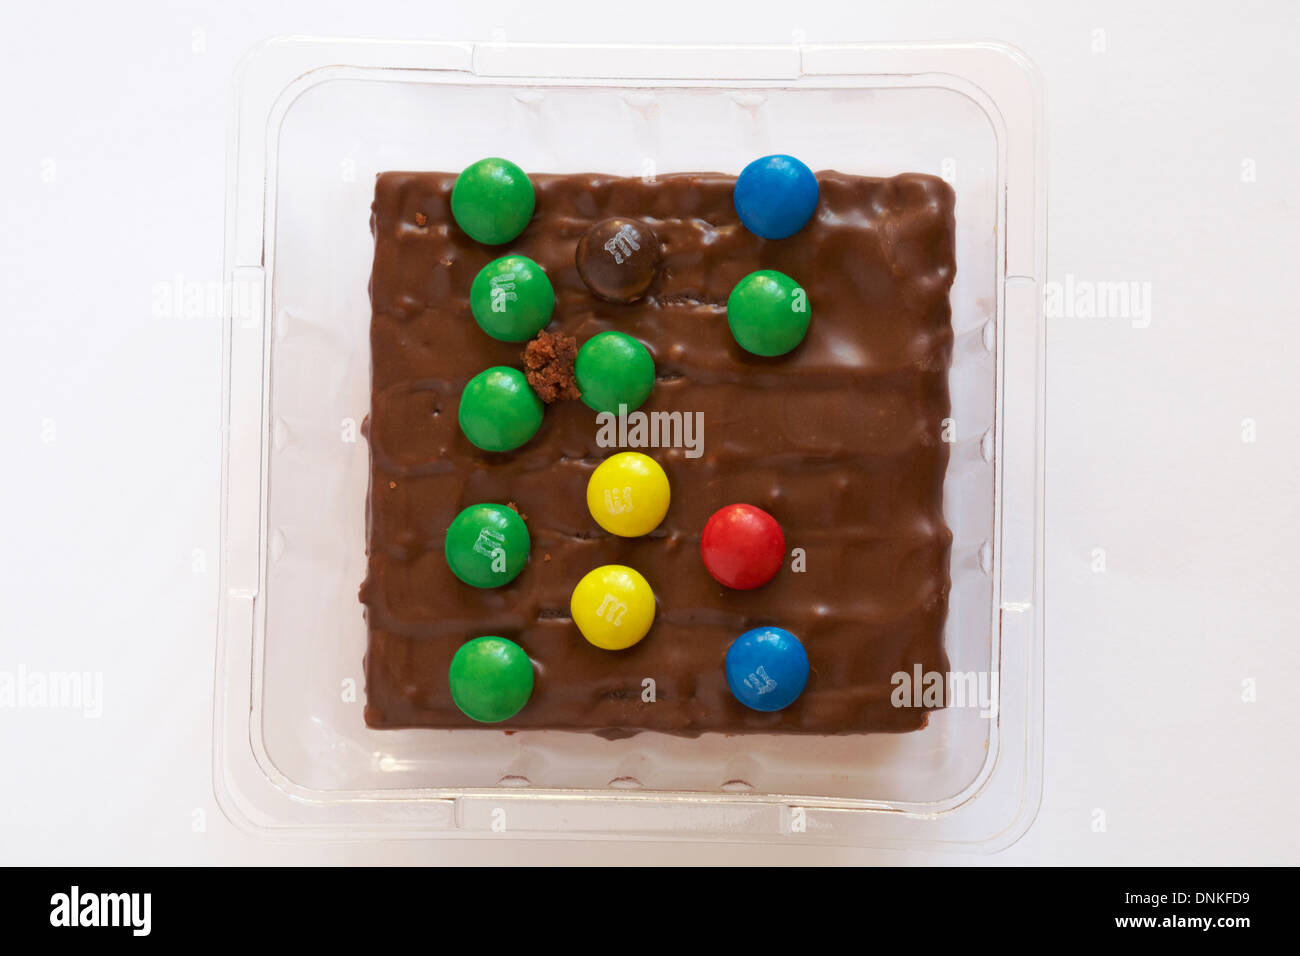 Fudge Brownie M&M's Are Coming Back in April!